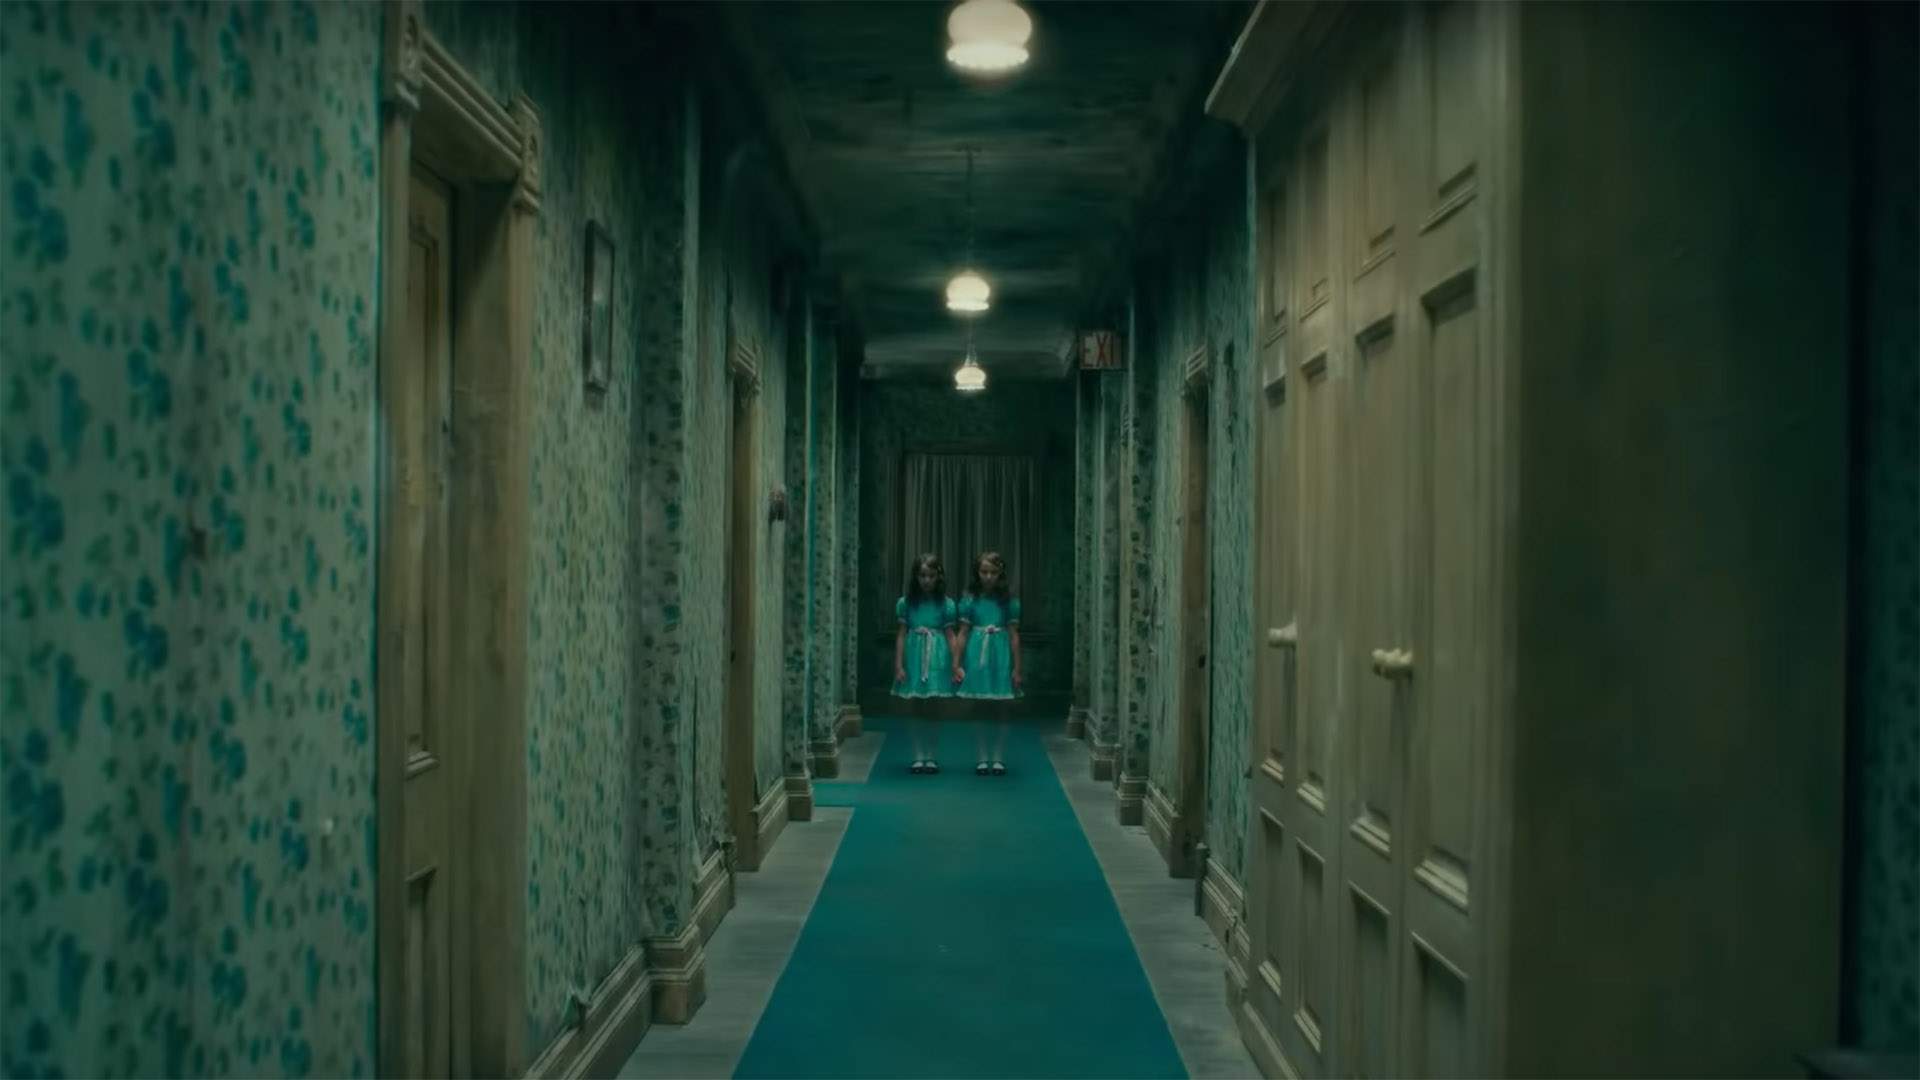 The Eerie Trailer for 'Doctor Sleep' Takes You Back Into the Terrifying World of 'The Shining'